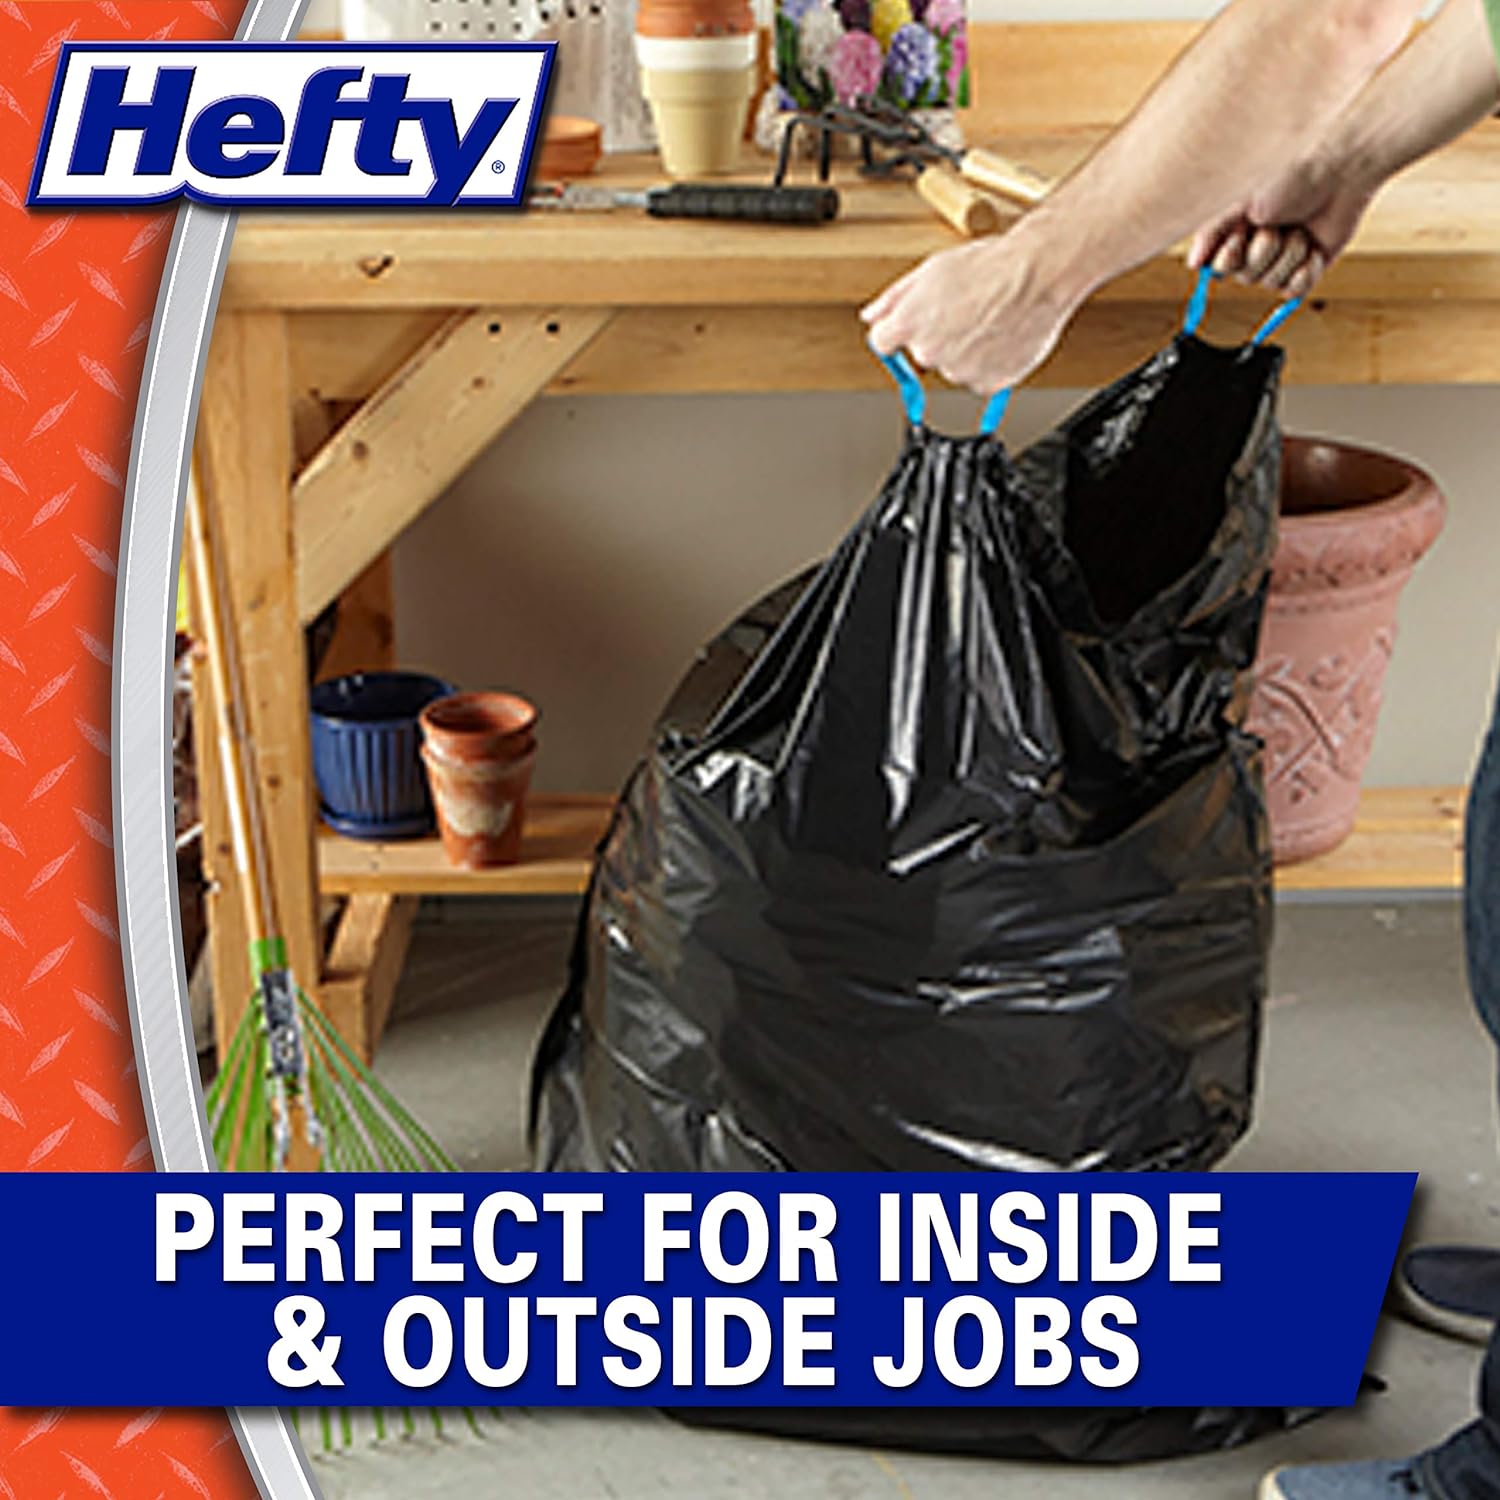 Wholesale prices with free shipping all over United States Hefty Strong Large Trash Bags, 30 Gallon, 56 Count - Steven Deals